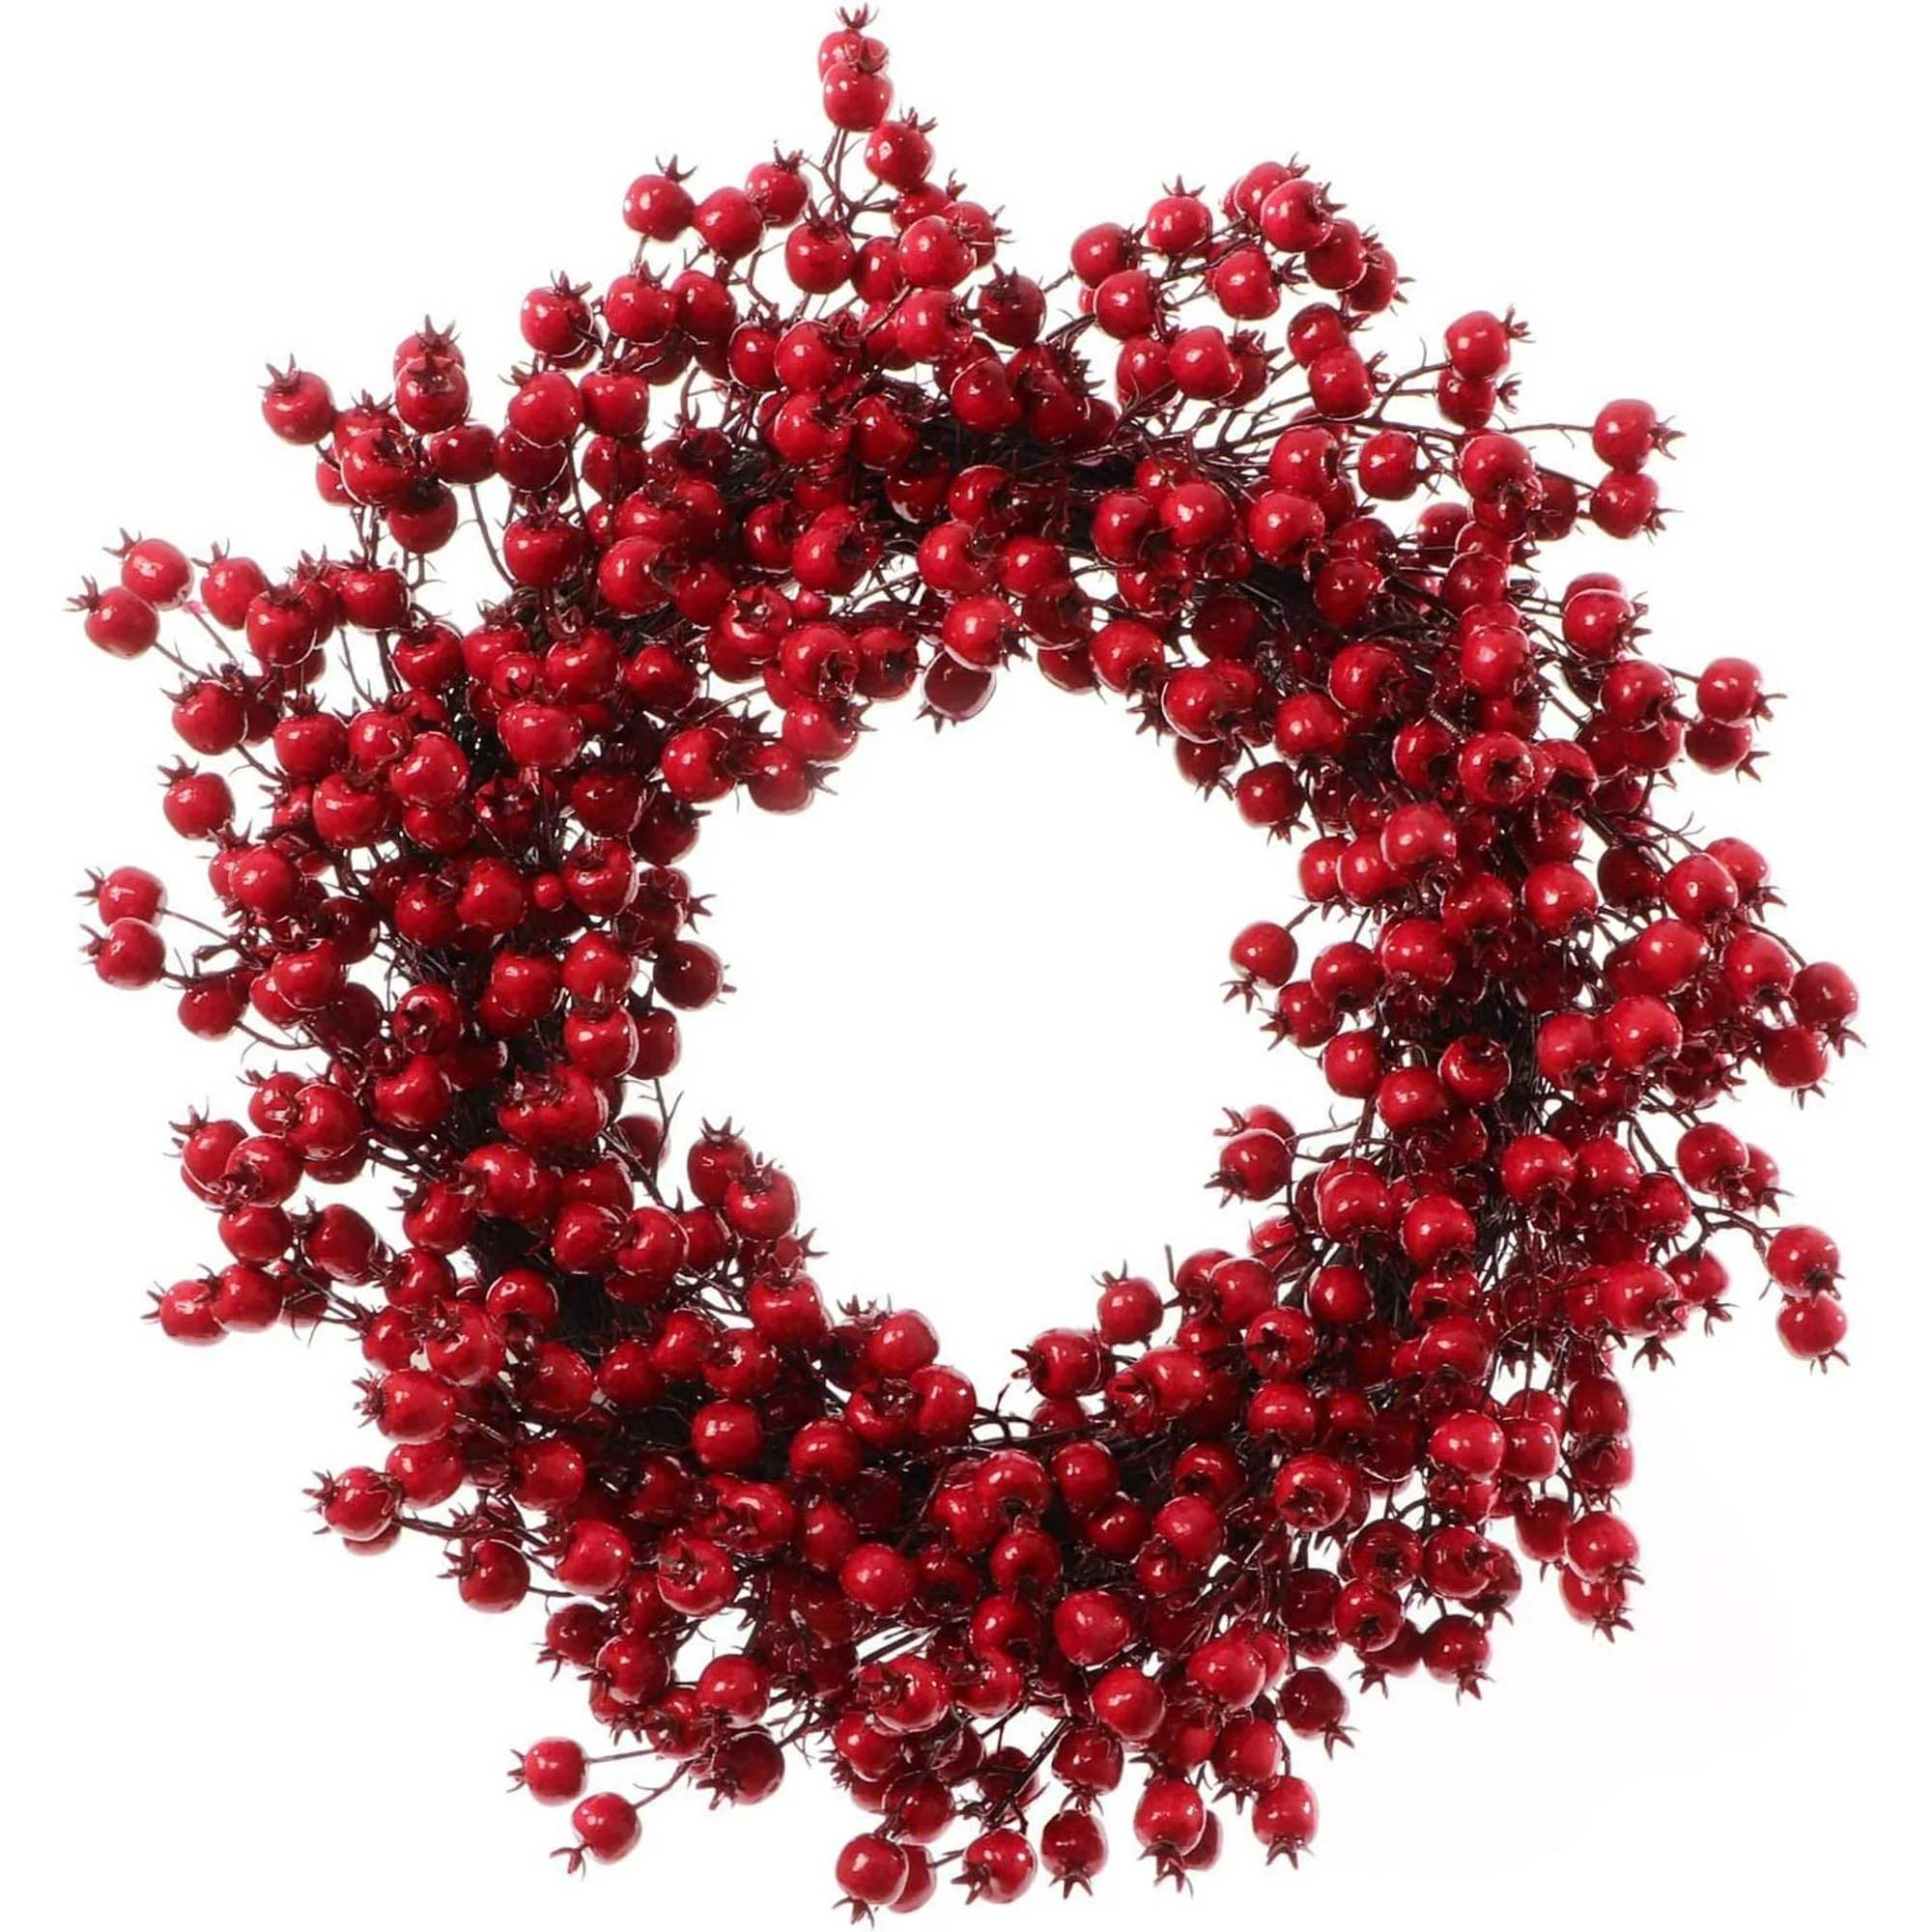 Large Indoor Holiday Christmas Wreath